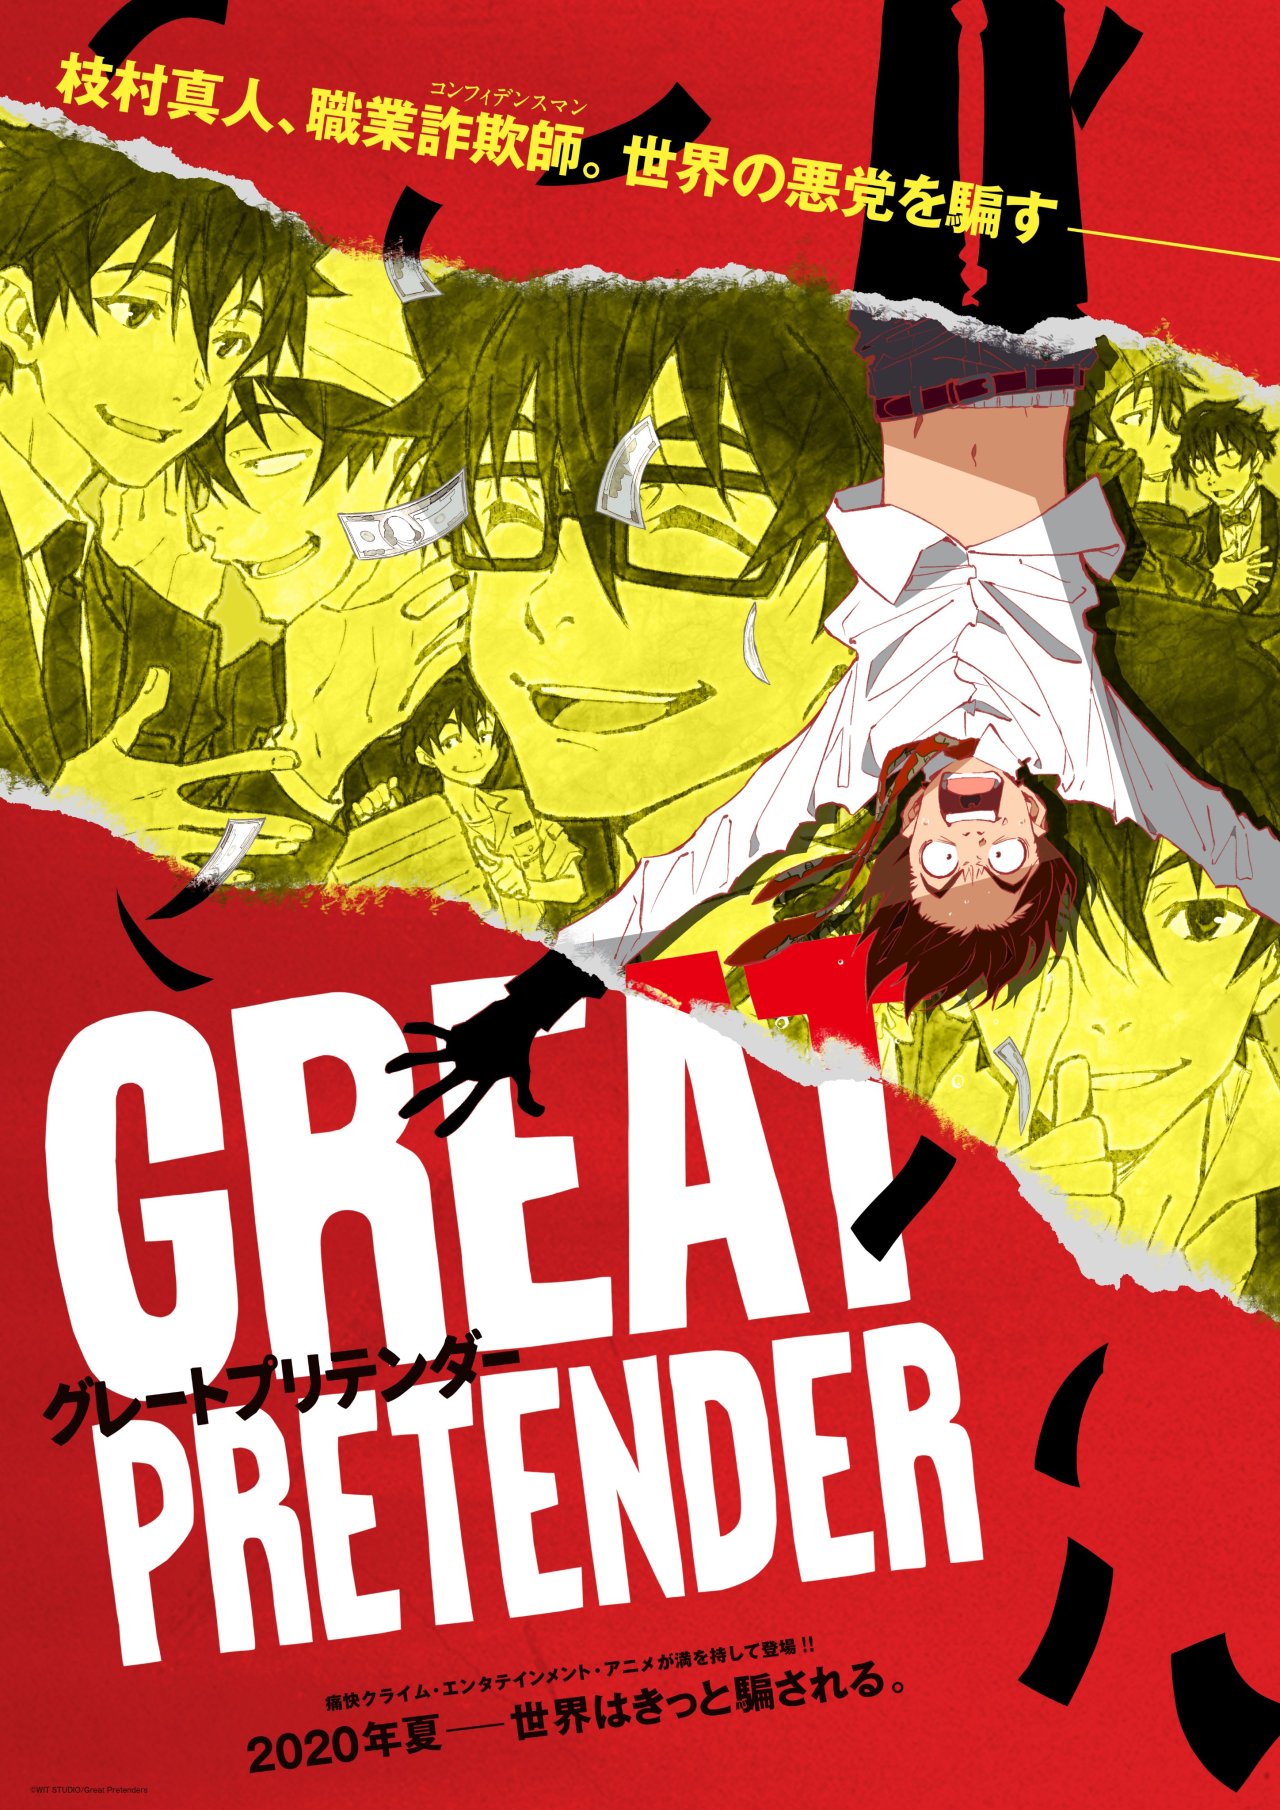 A new key visual, PV, and cast listing for WIT Studio’s new original anime “Great Pretender” has been revealed.
The 23-episode series is scheduled to premiere on Fuji TV’s +UItra programming block in July 2020. It will also be distributed worldwide...